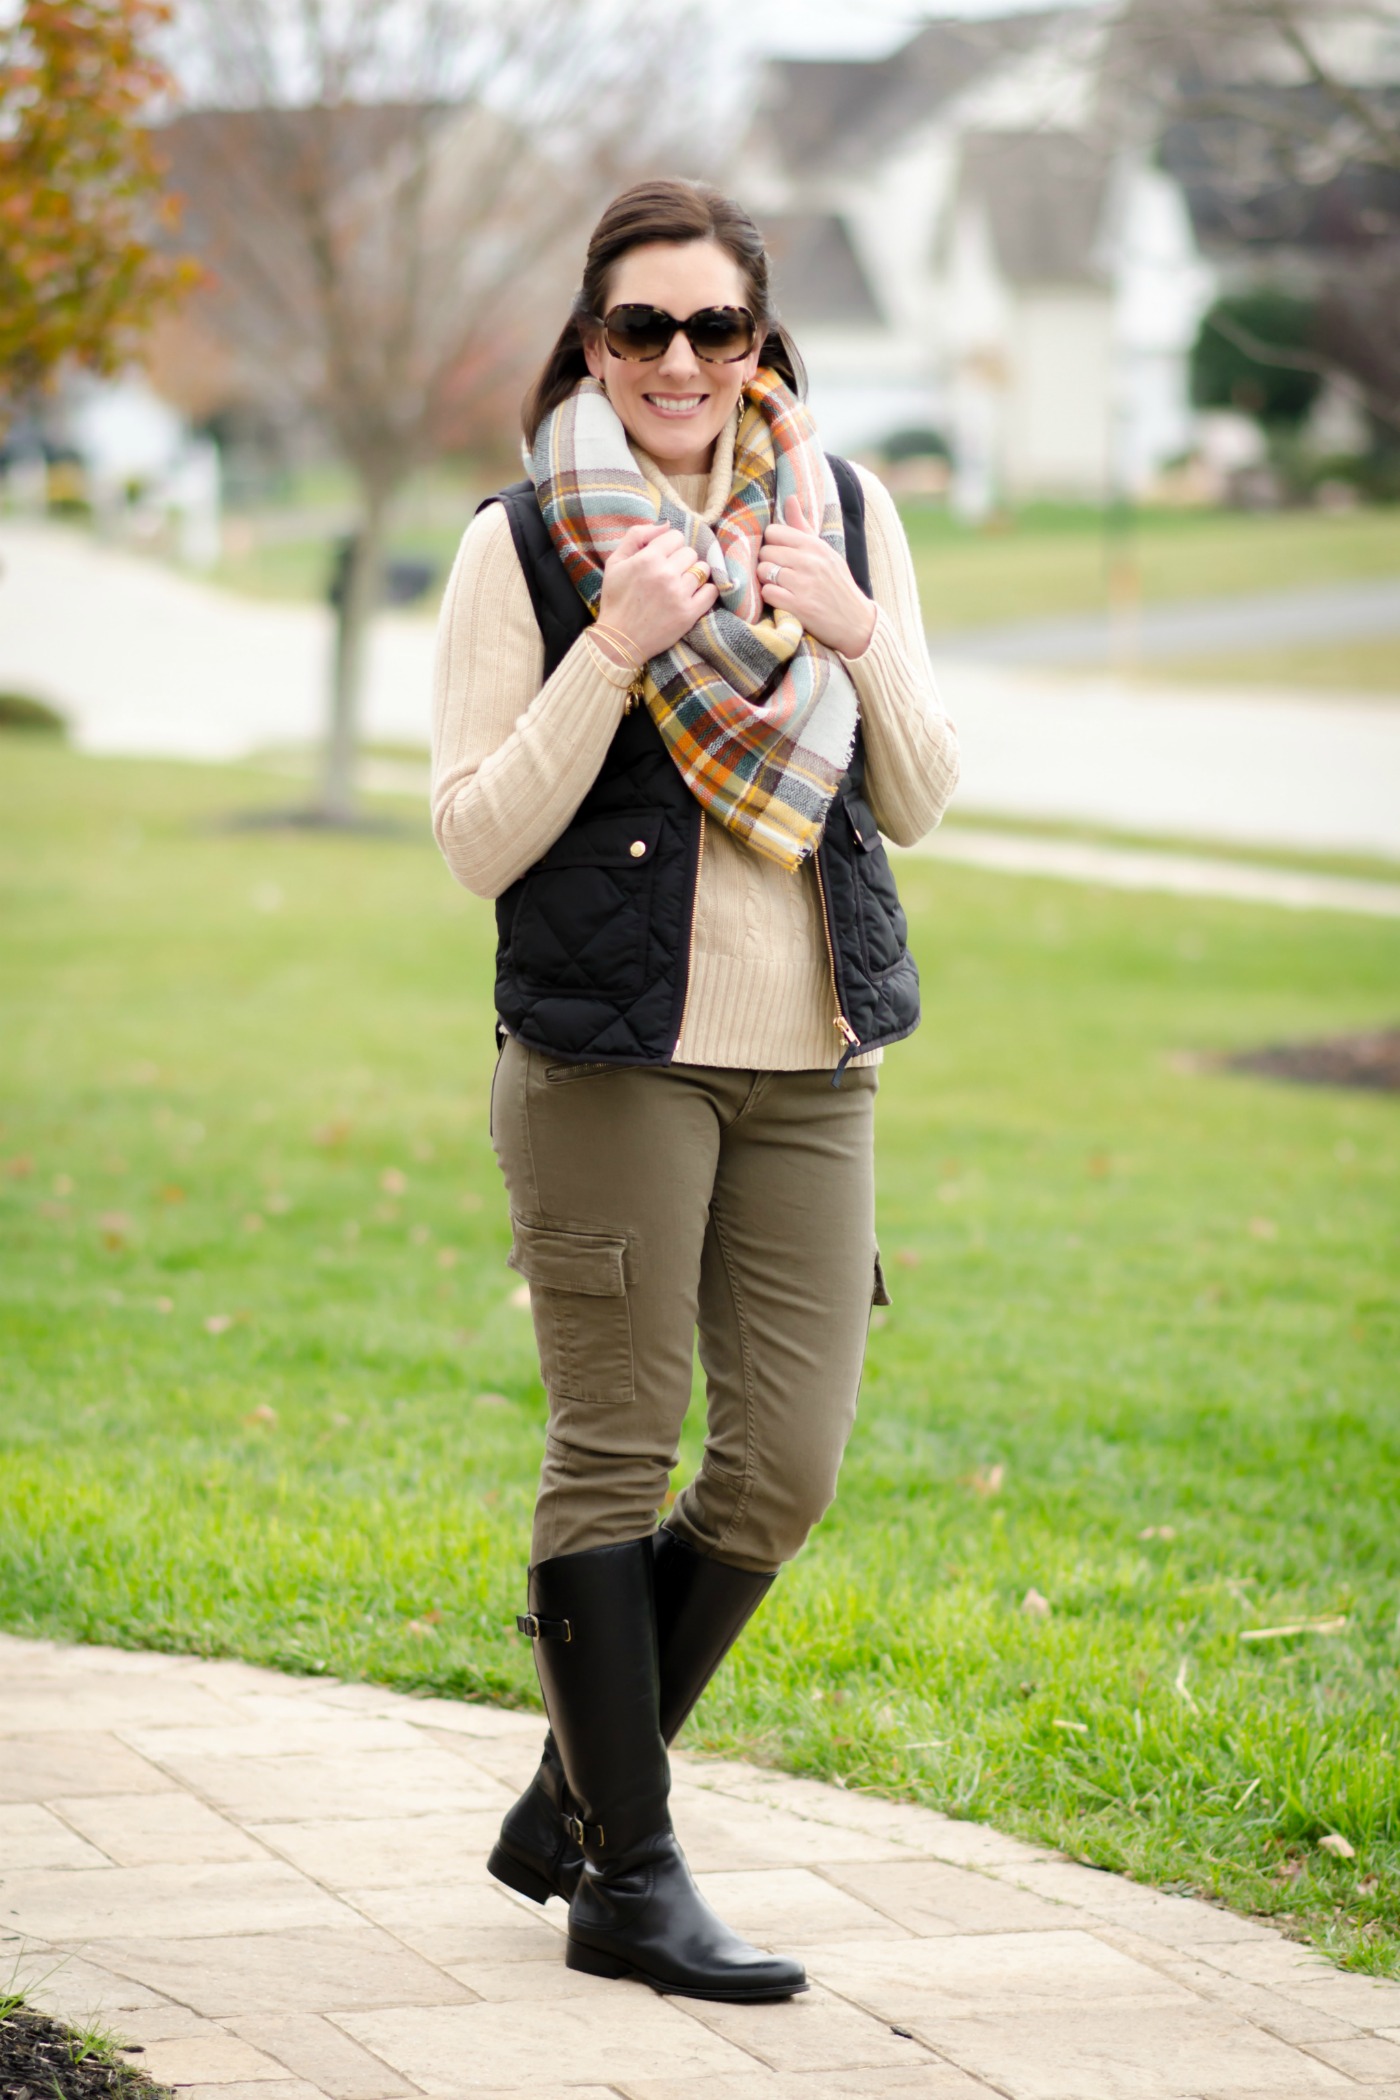 This is the perfect outfit for a chilly fall day spent outdoors: down vest, wool turtleneck, riding boots and blanket scarf.